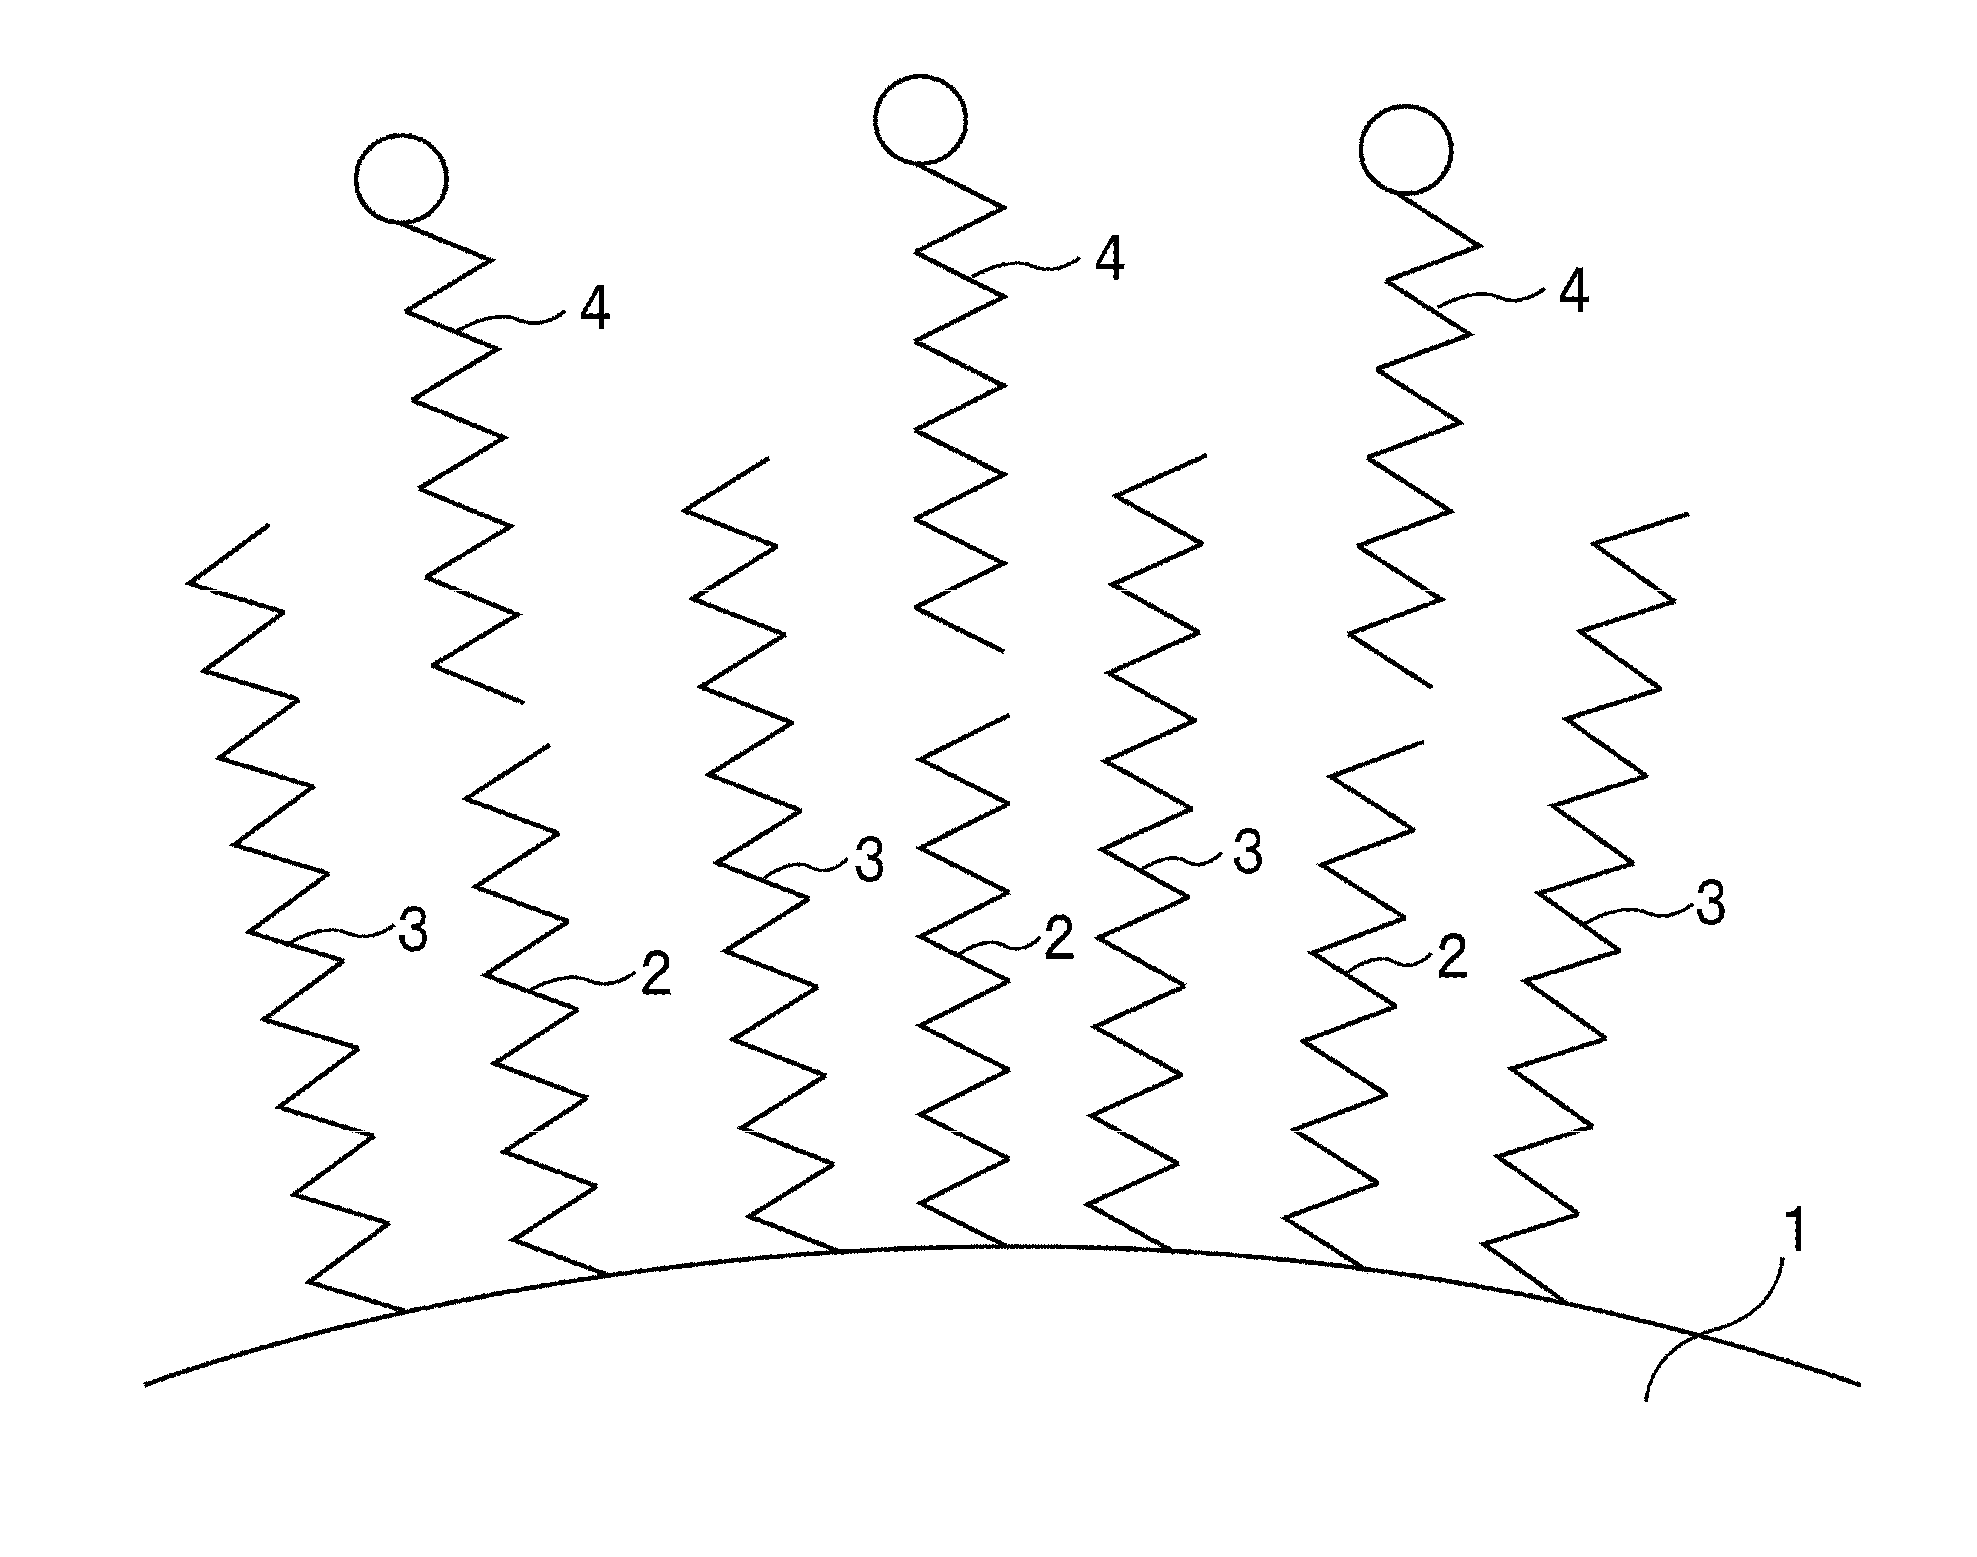 Surface-treated calcium carbonate and paste resin composition containing same